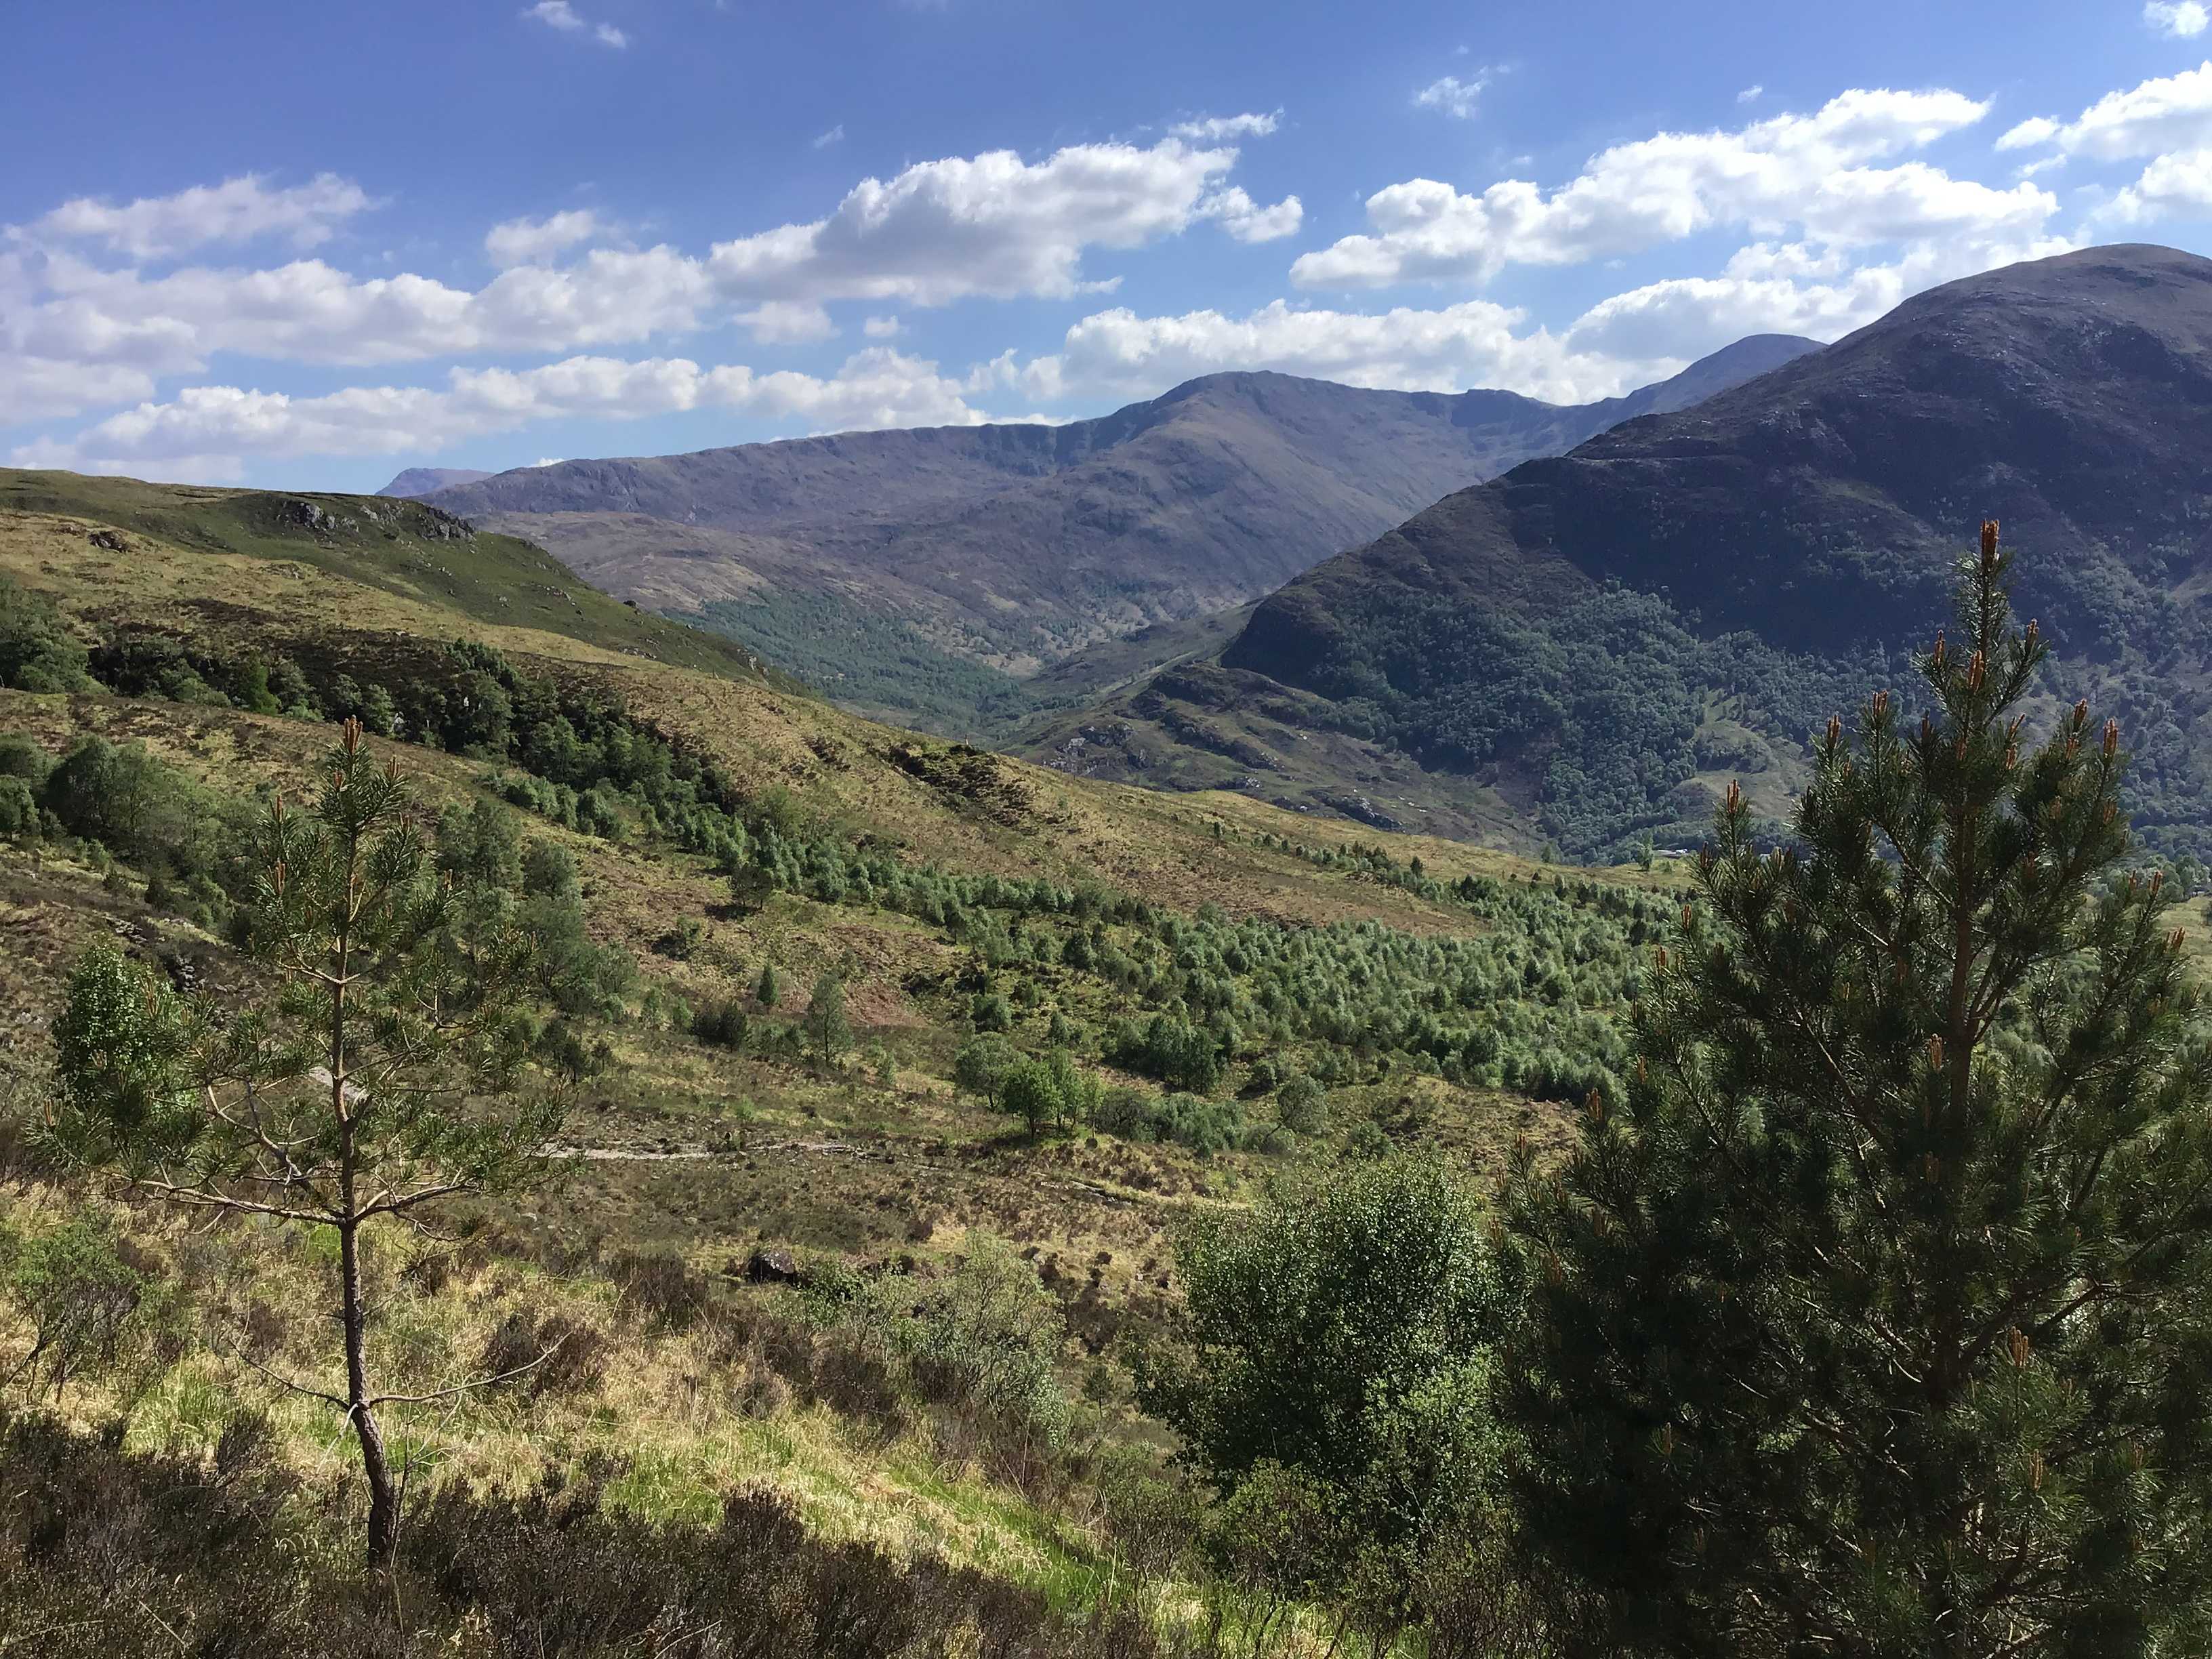 Kinlochleven Native Woodland Regeneration was an ambitious restoration project on the banks of Loch Leven